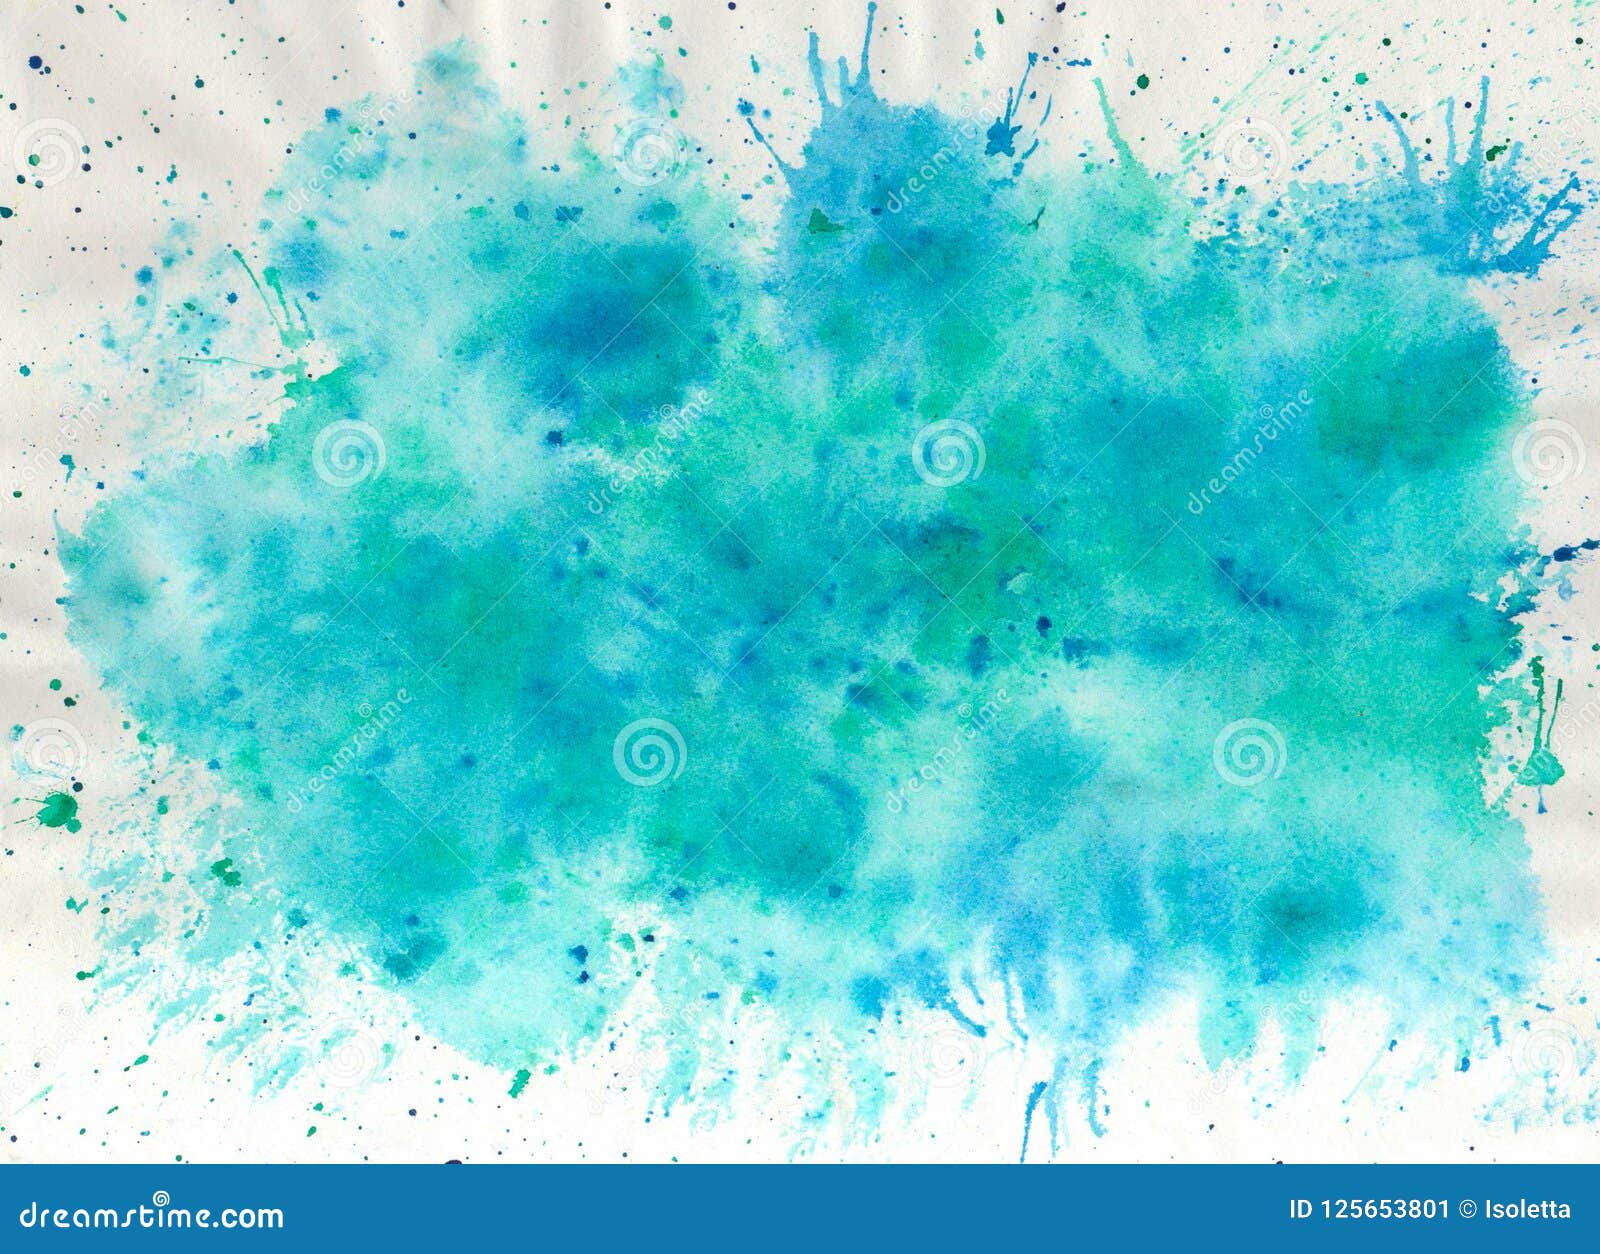 Creative Texture For Design. Vibrant Hand Painted Watercolor Background.  Handmade Overlay. Decorative Colorful Textured Paper. Han Illustration  125653801 - Megapixl